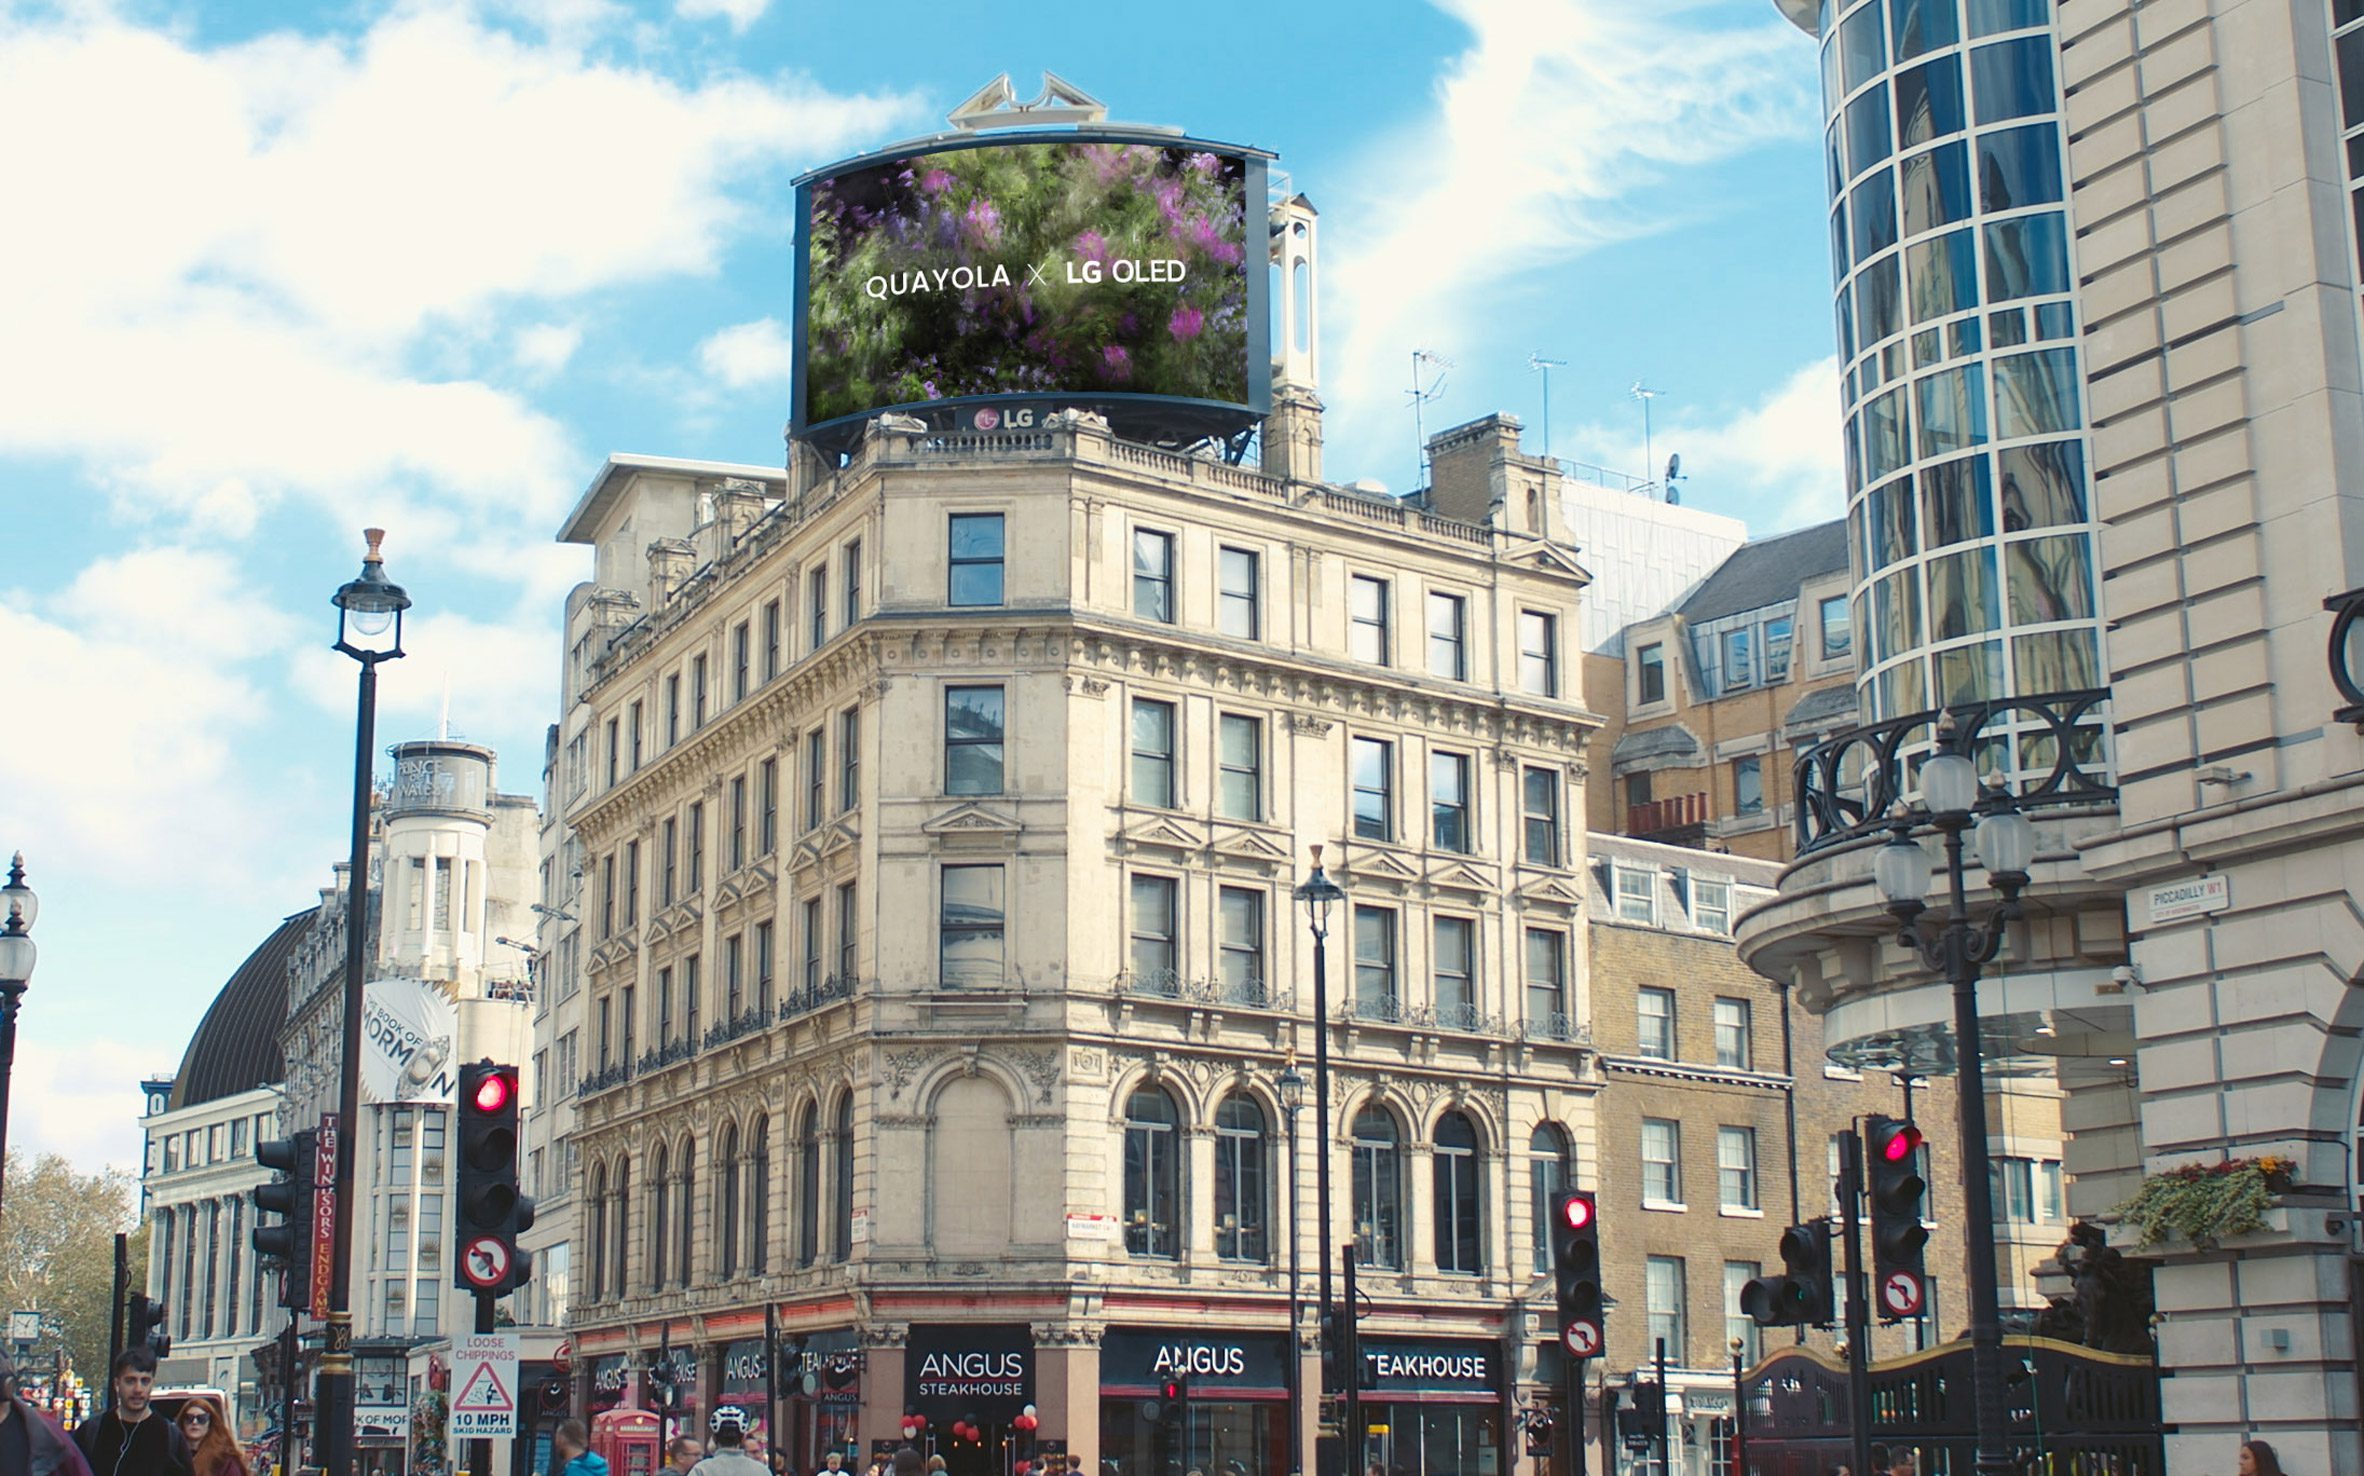 Photo of a billboard ad above a building on Picadilly Circus showing one of the artworks with the text "LG x Quayola" overlaid